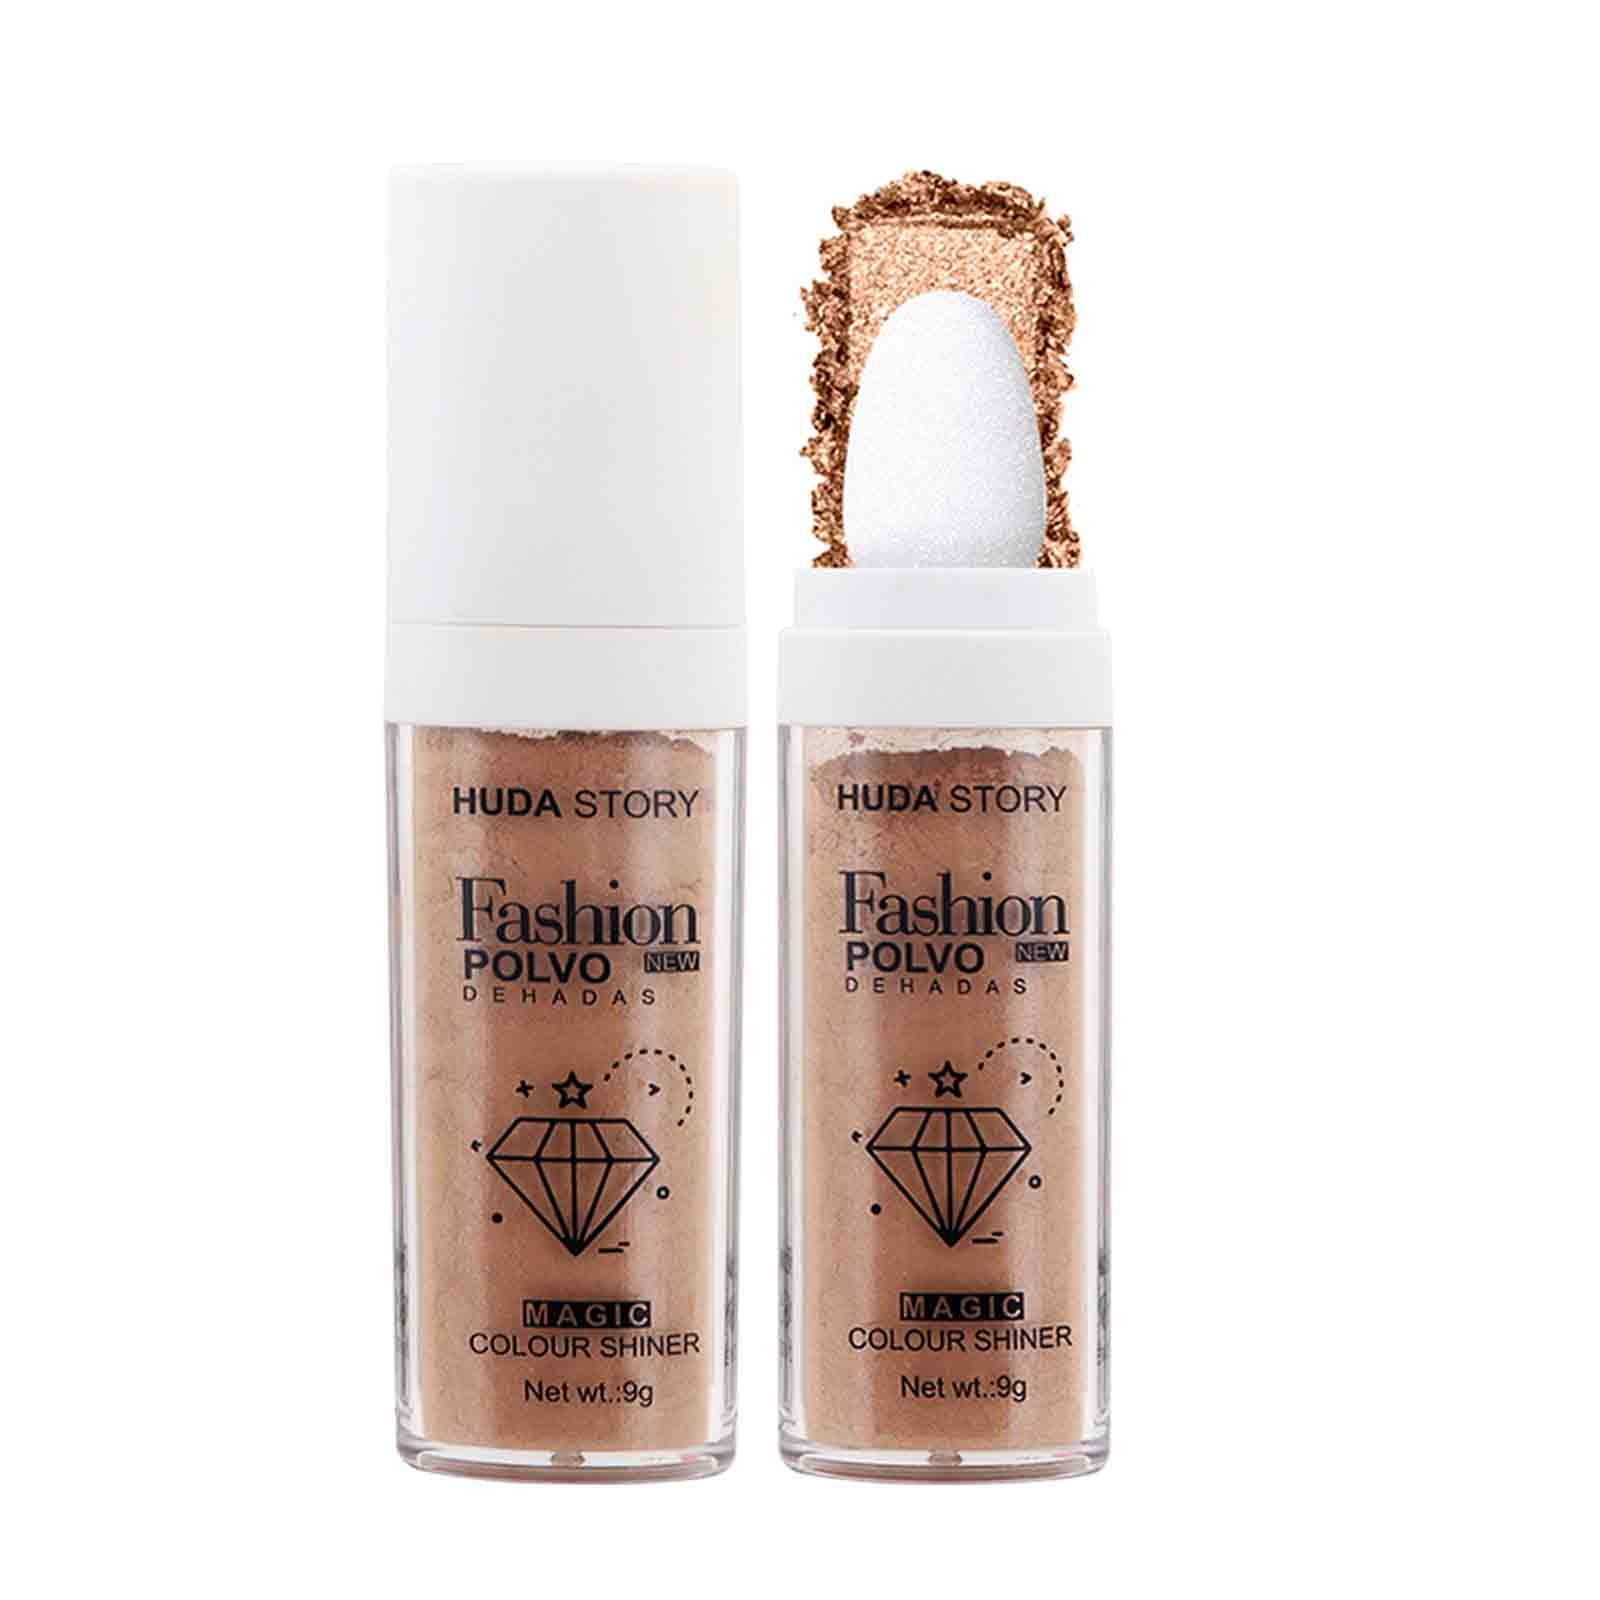 Realhomelove Goddess Glow Makeup Shimmer Stick, Goddess-glow Makeup Shimmer Stick, Makeup Highlighter, Glow Makeup for Face, for Lip Face Body Makeup